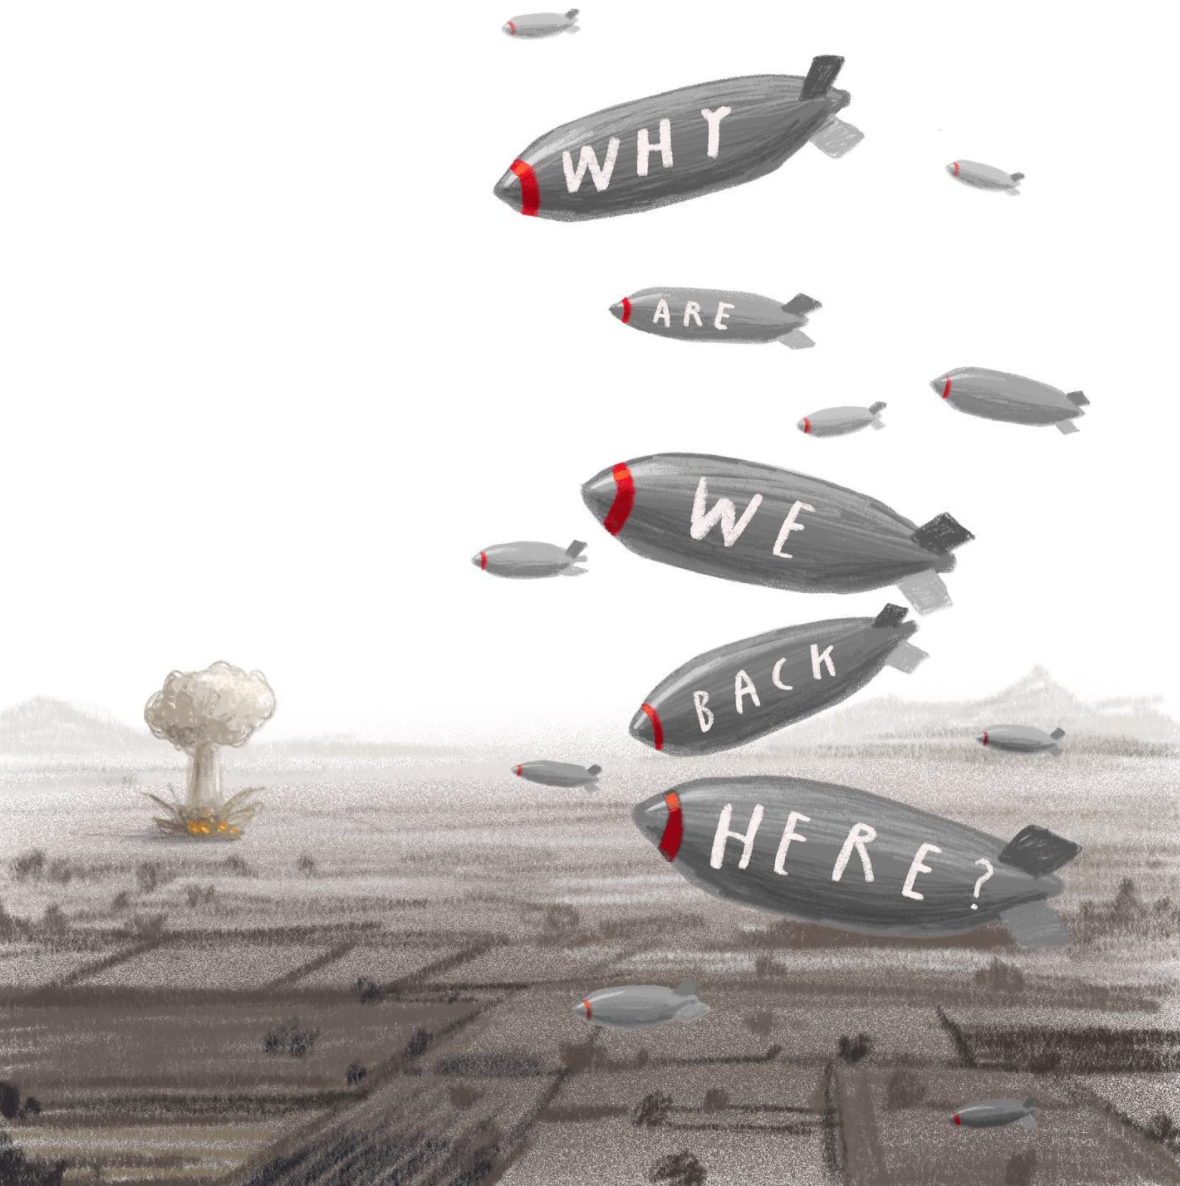 Artwork by Oliver Jeffers depicts bombs falling on Ukraine, all branded with the question 